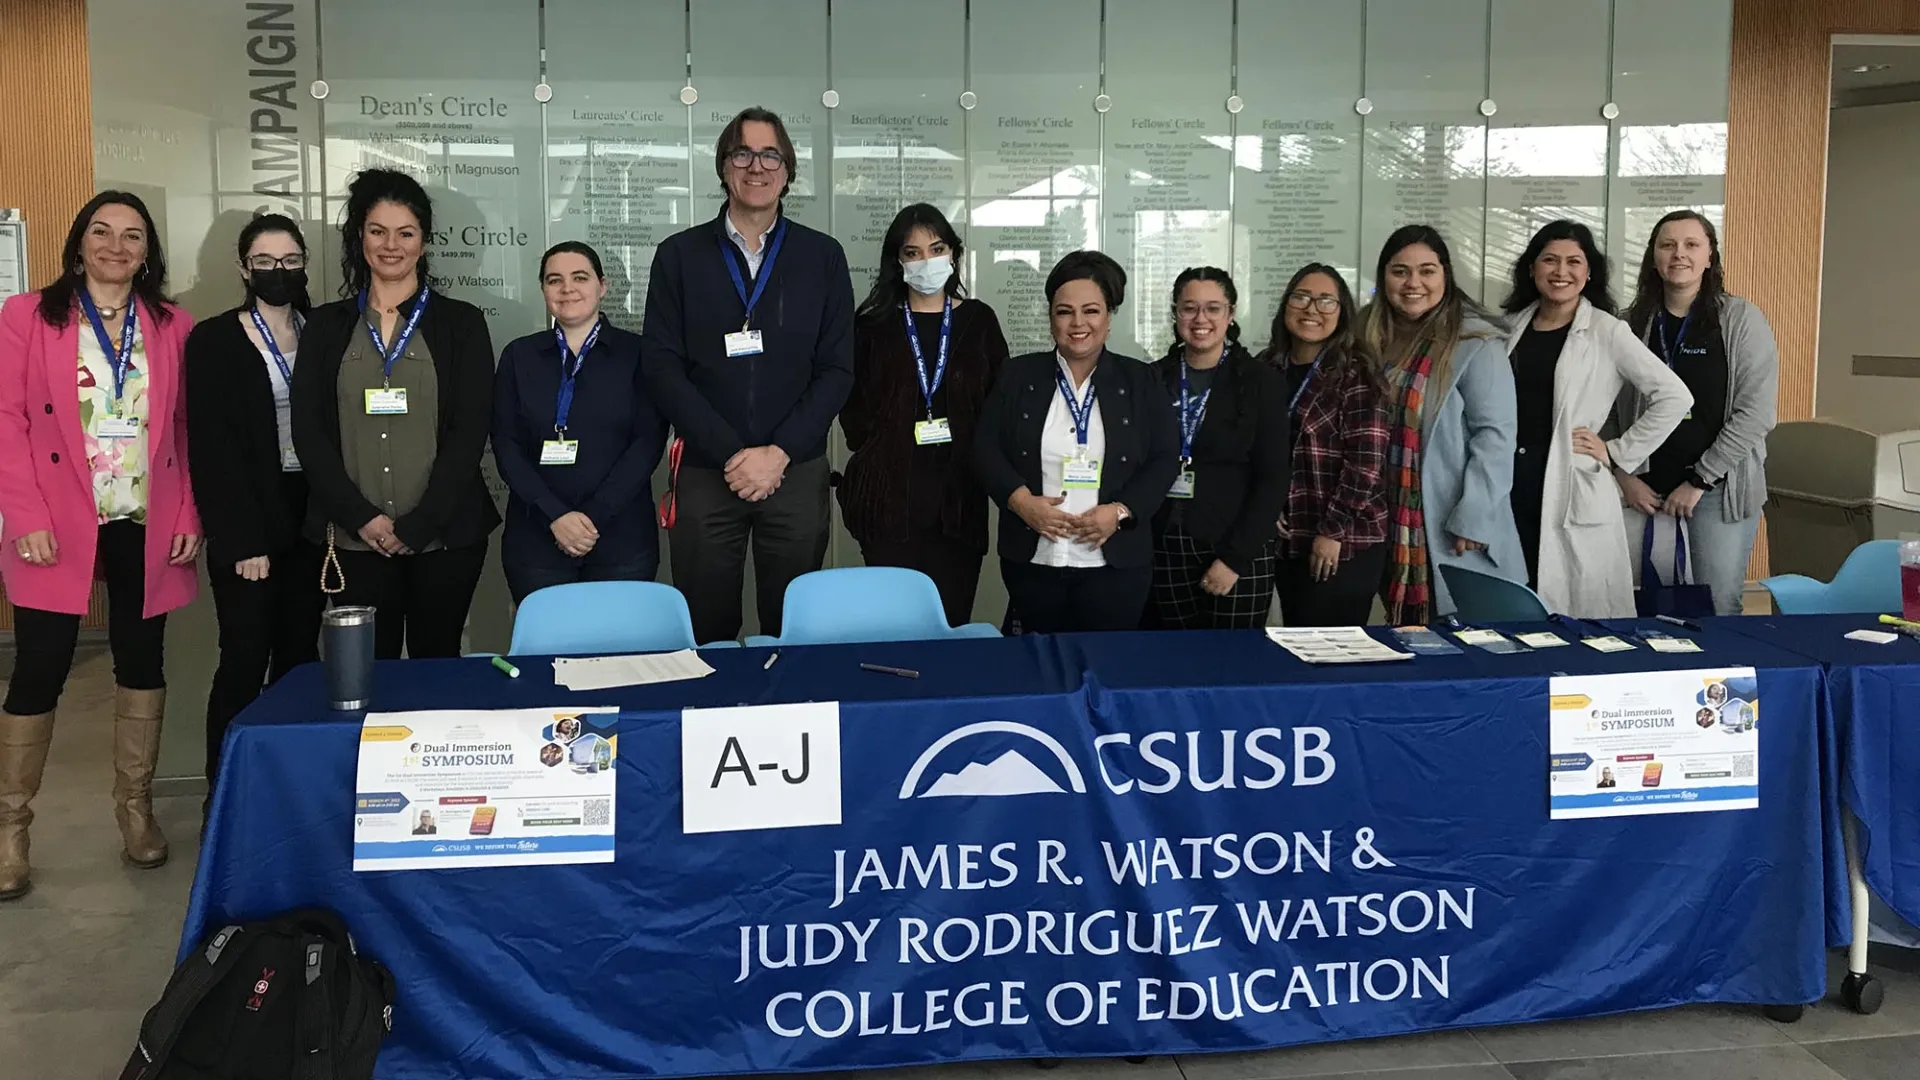 Some of the participants in the Dual Immersion Symposium at the James R. Watson and Judy Rodriguez Watson College of Education.